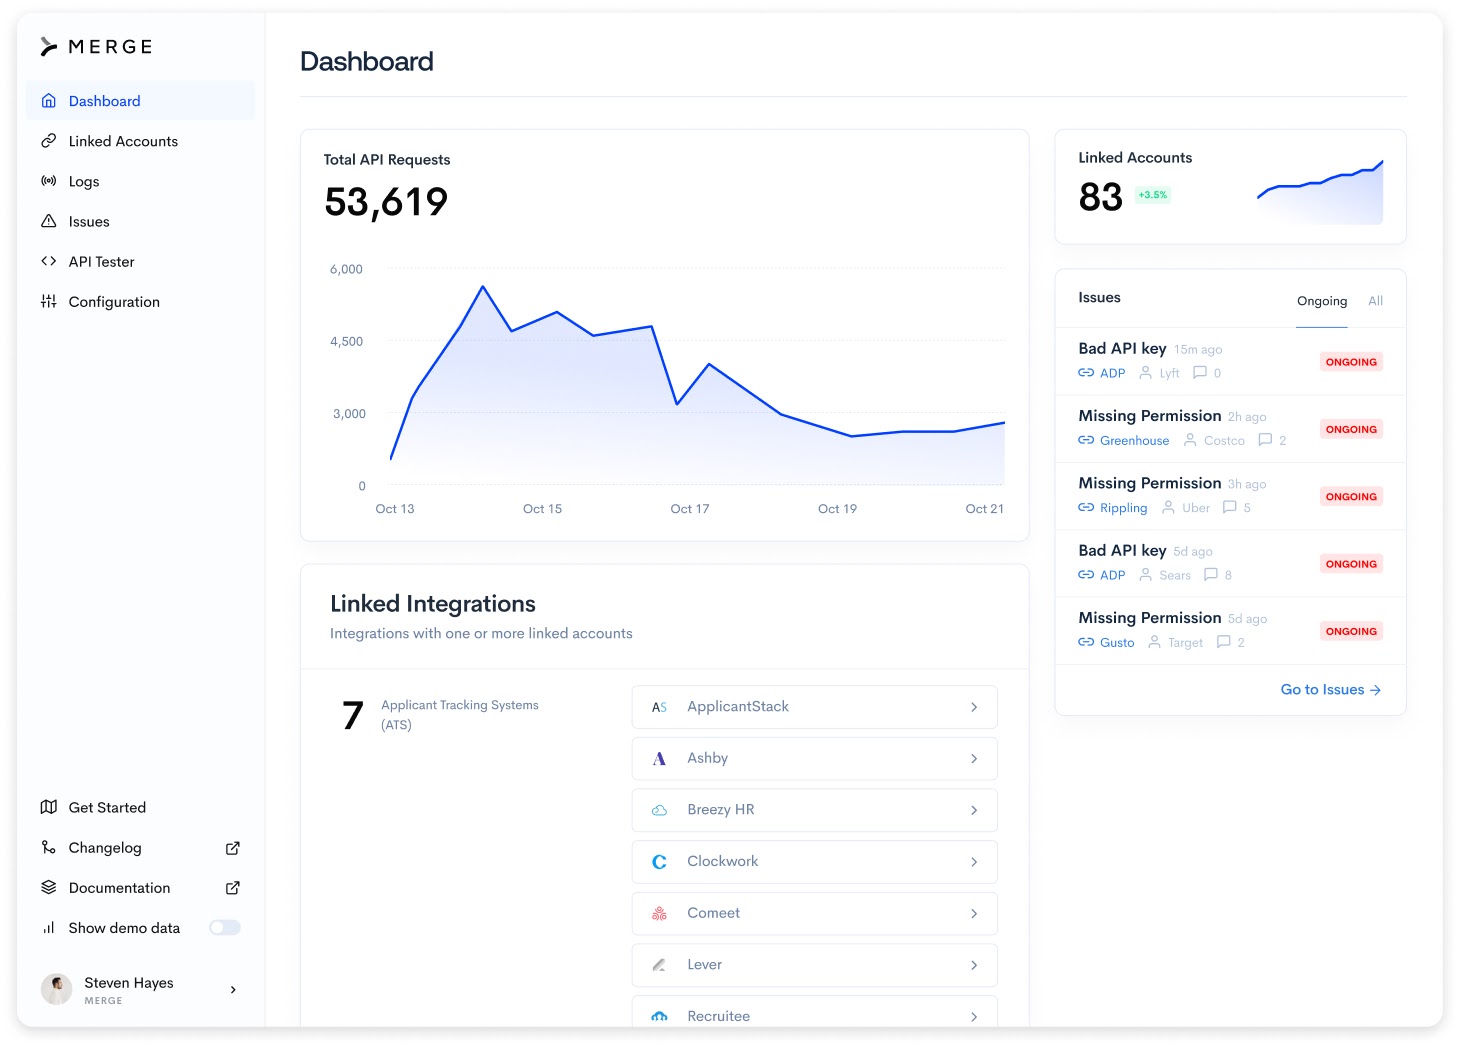 Merge Link's dashboard shows an authenticated Greenhouse Recruiting integration